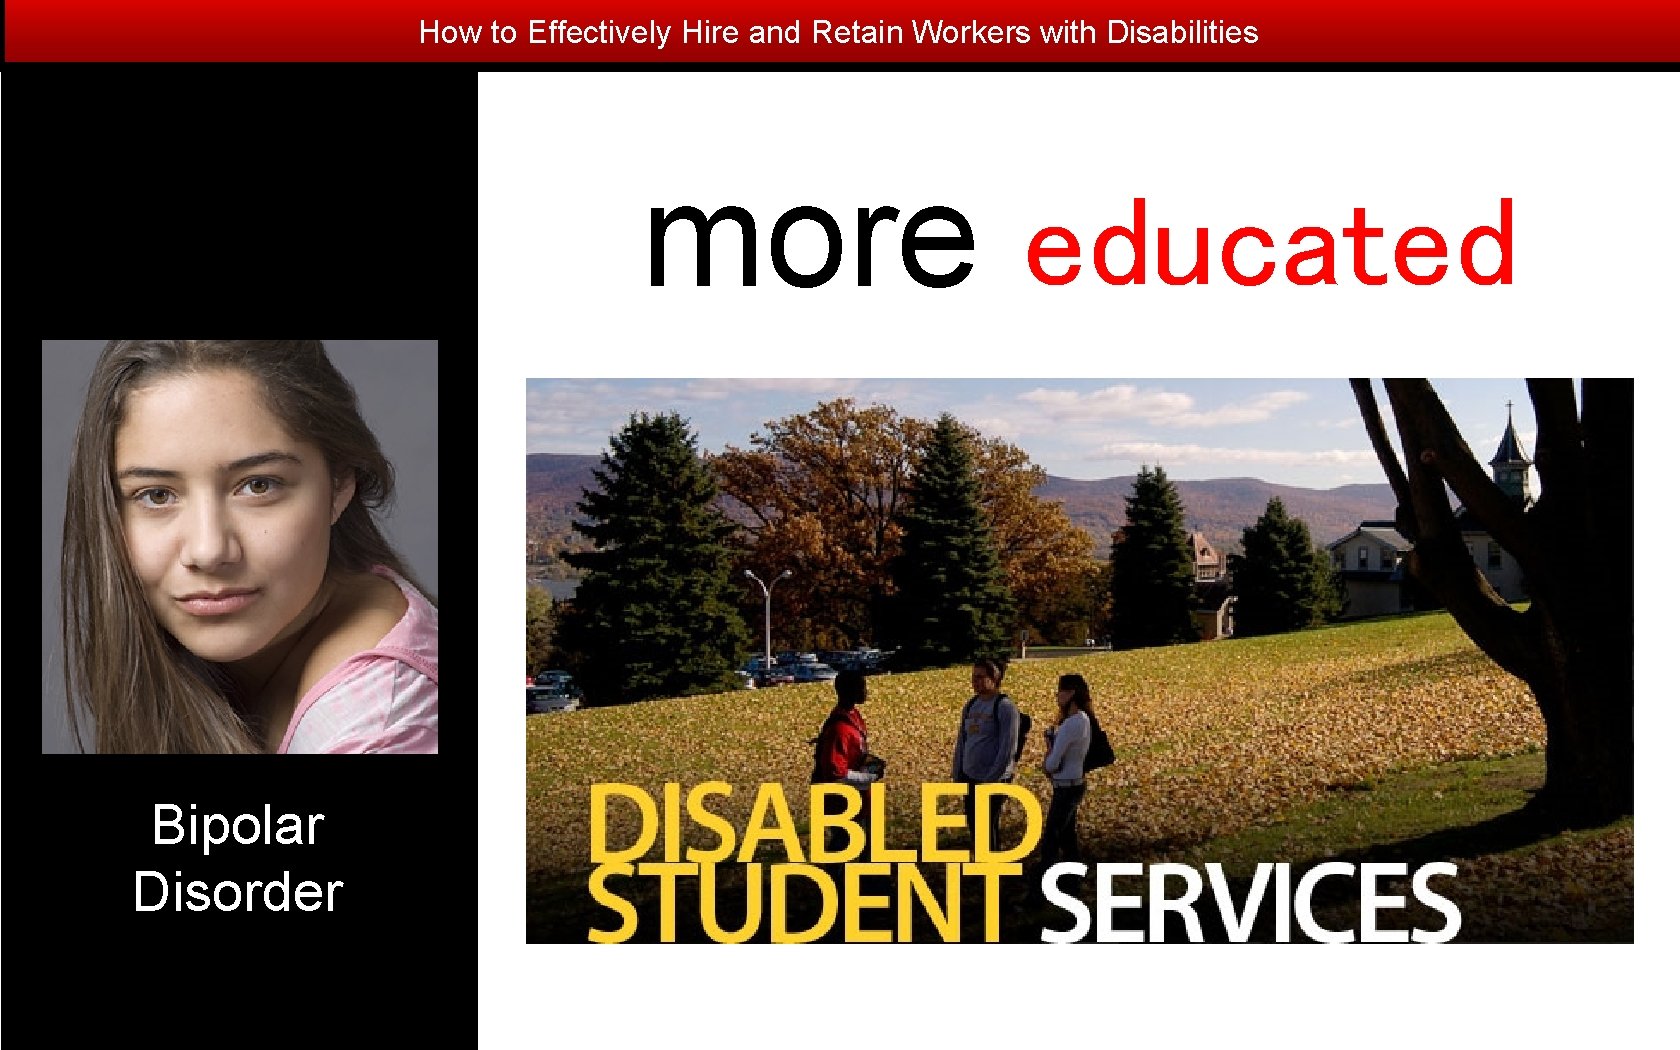 How to Effectively Hire and Retain Workers with Disabilities more educated Bipolar Disorder 